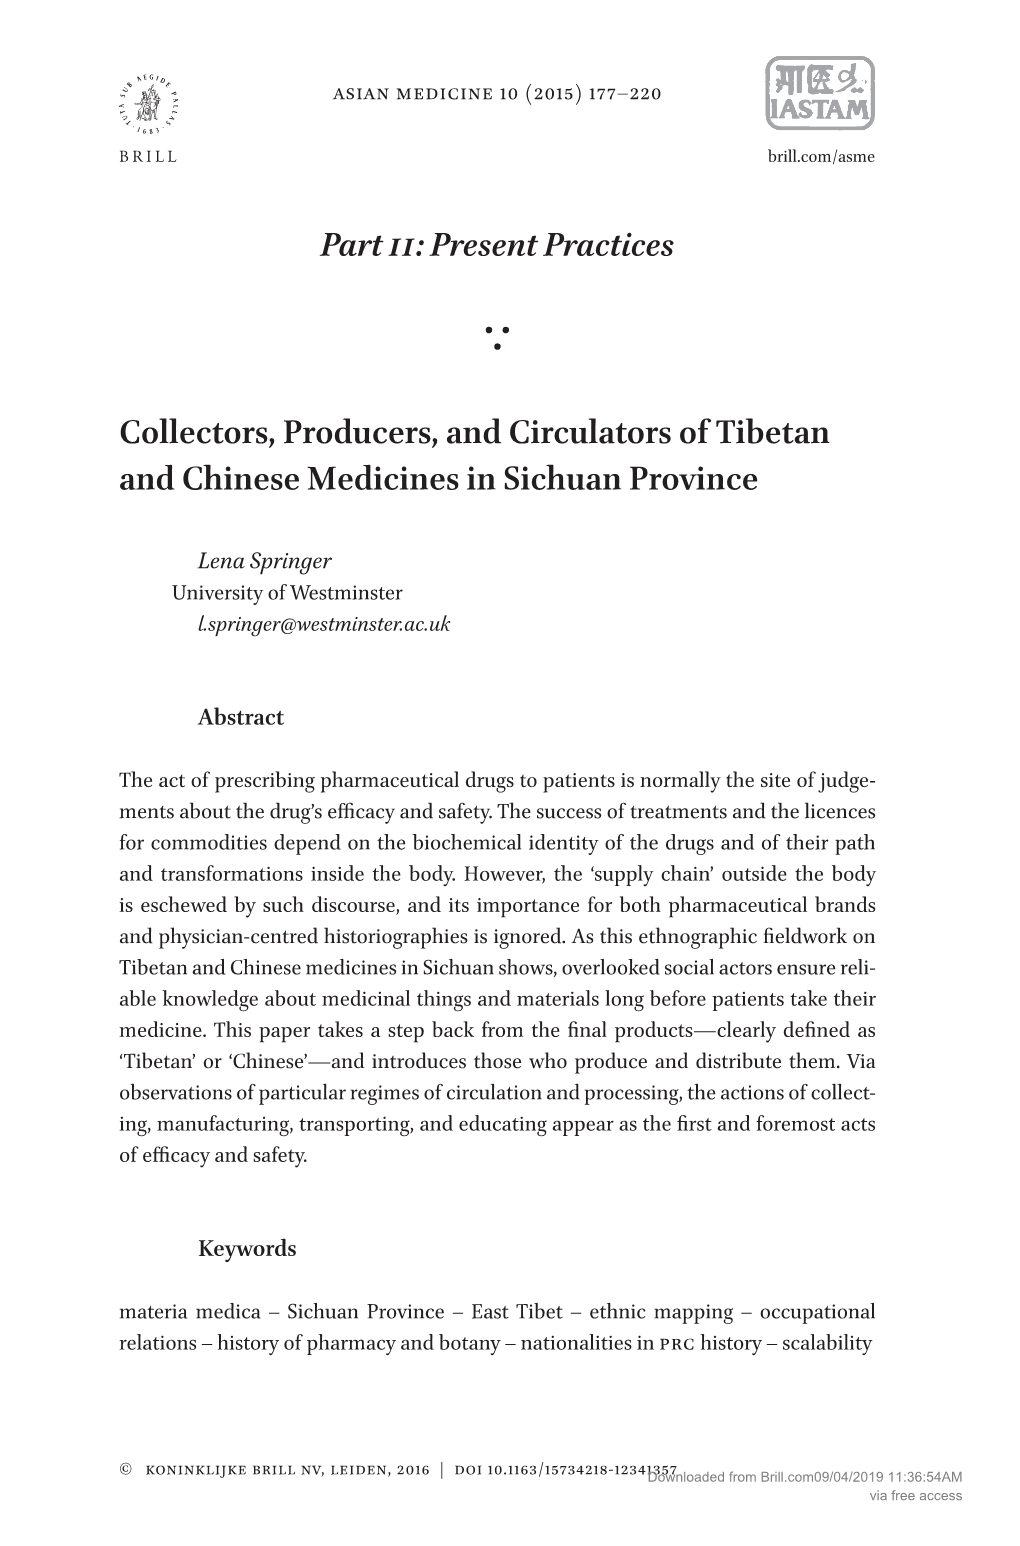 Present Practices Collectors, Producers, and Circulators of Tibetan and Chinese Medicines in Sichuan Province